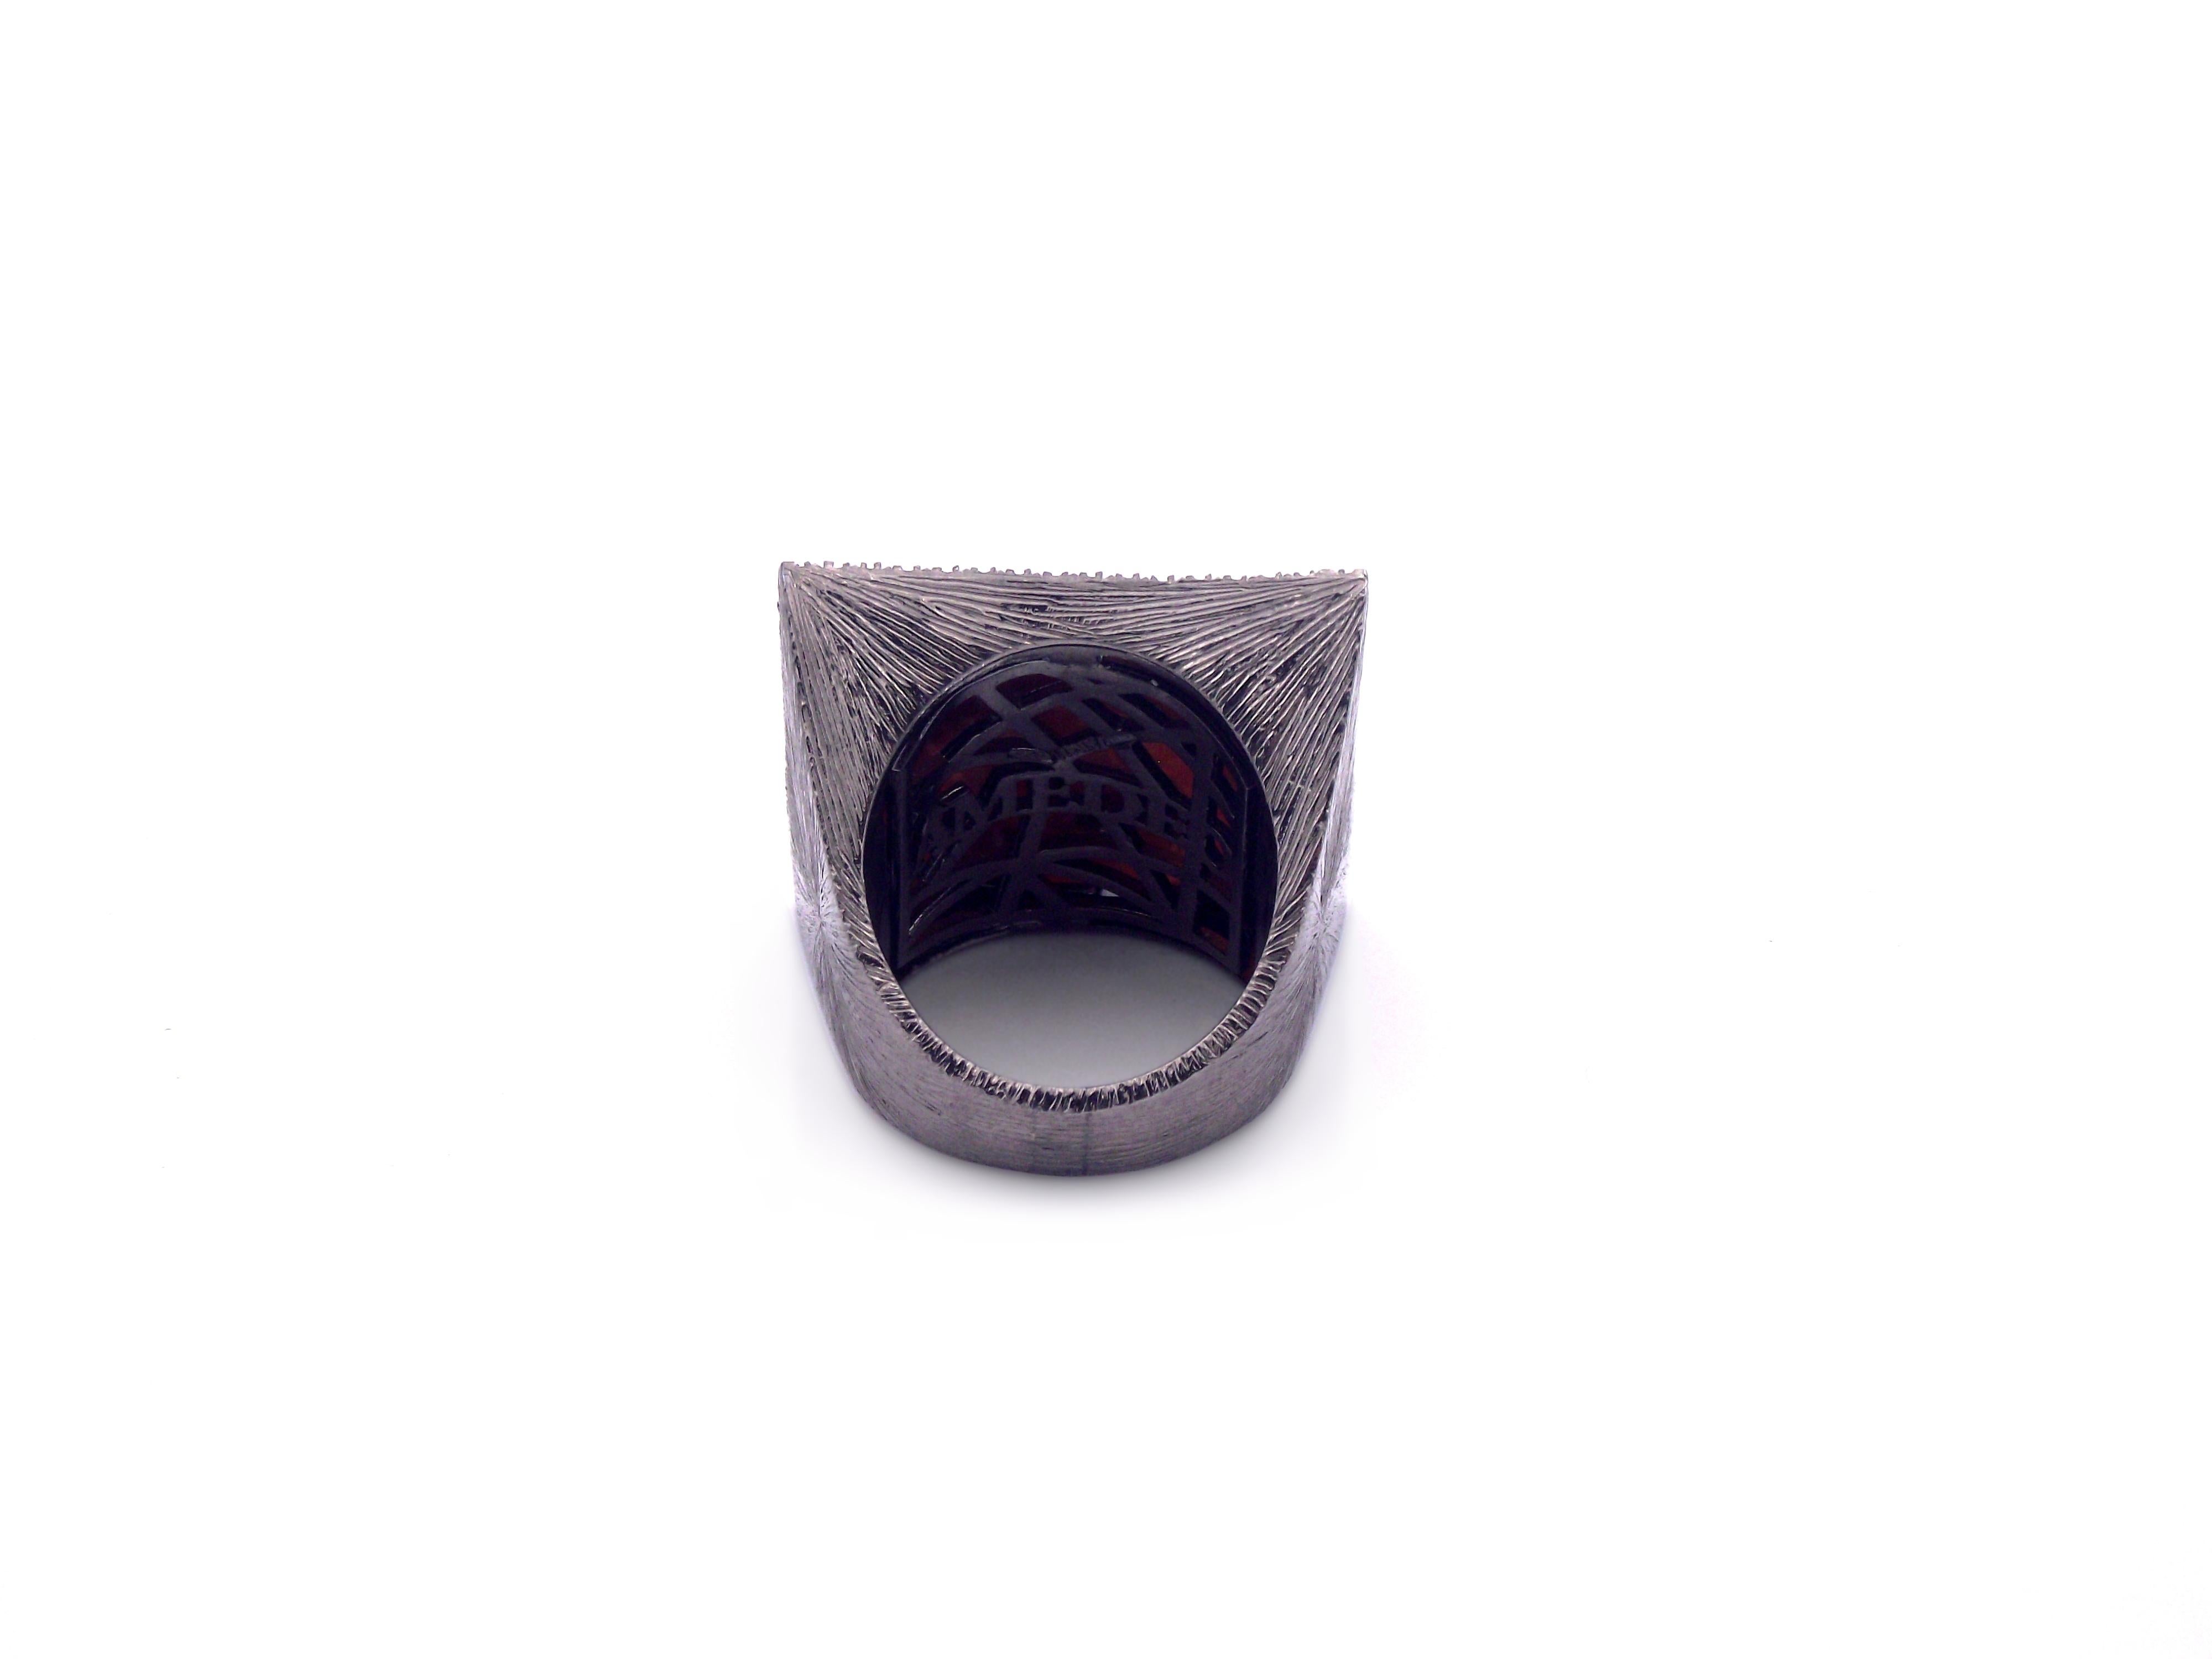 25mm sardonyx shell cameo hand-carved set on 18kt and sterling silver black, rhodium plated  with 0.58cts of black diamonds.